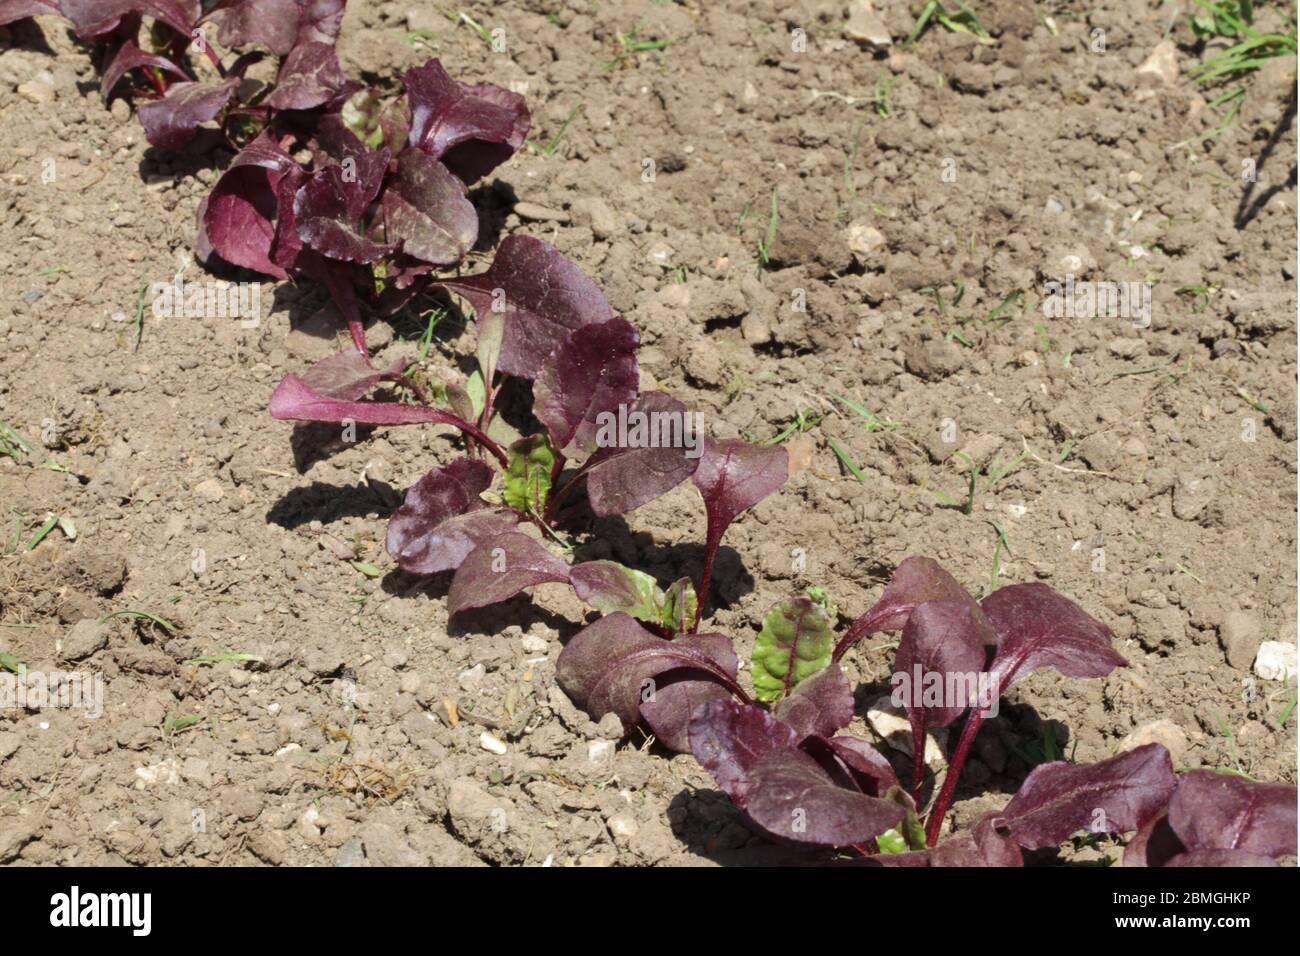 Rows of Beetroot growing in a vegetable garden. Stock Photo